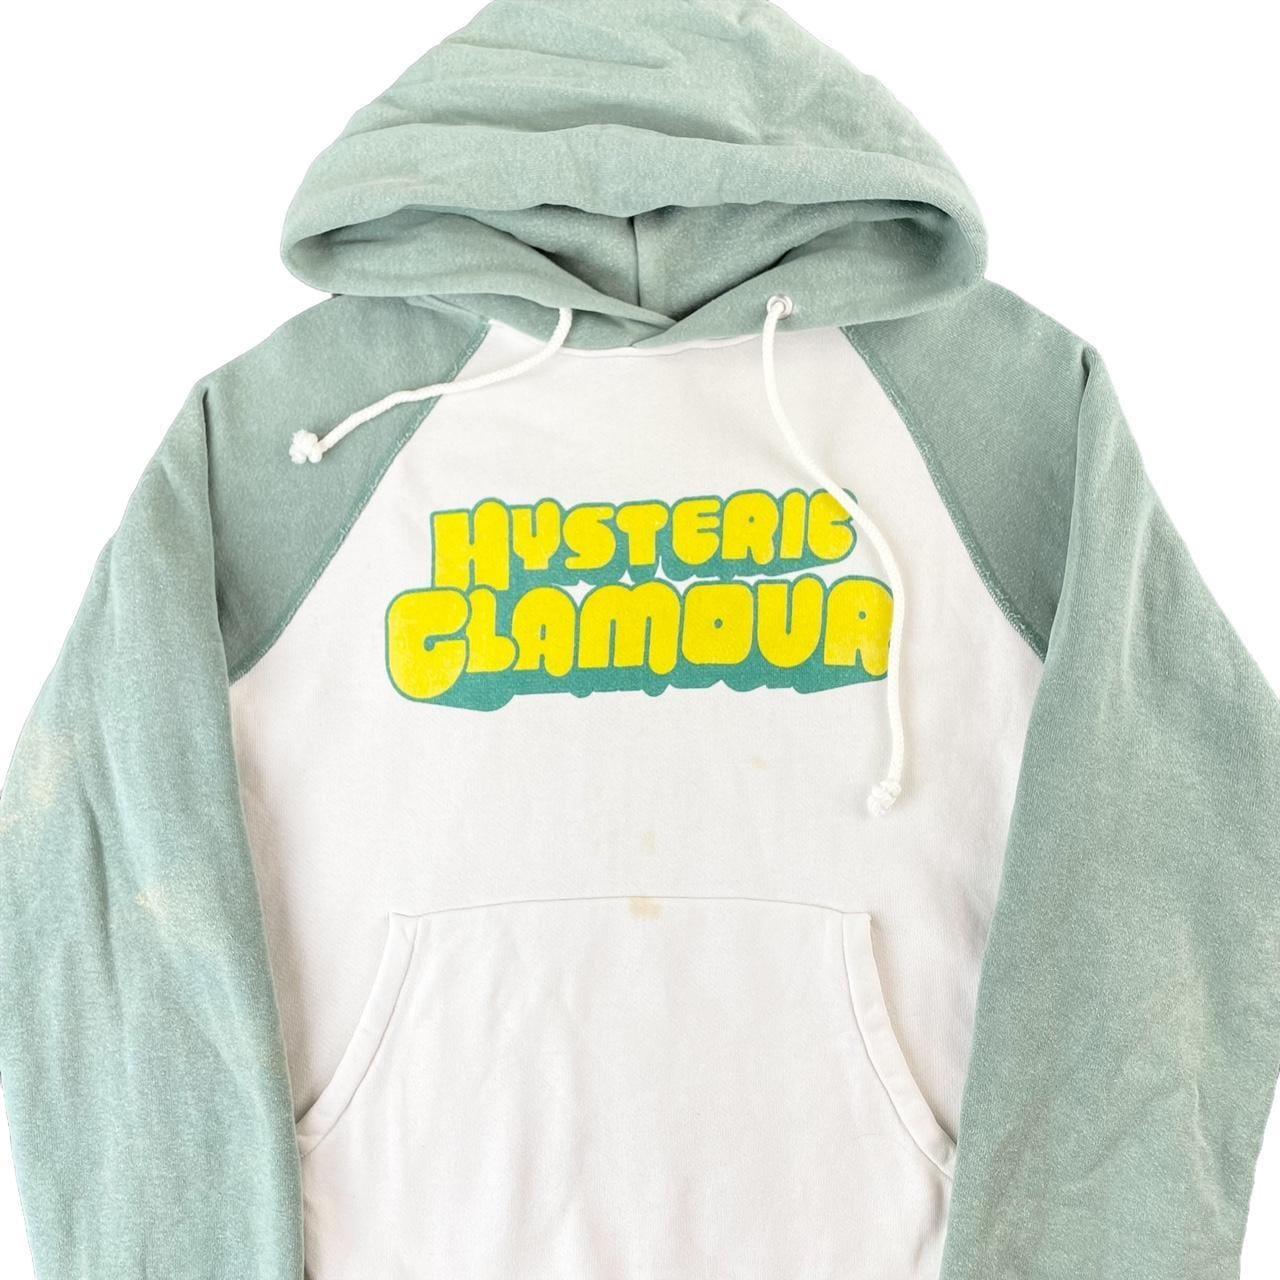 Vintage Hysteric Glamour hoodie woman’s size S - Known Source